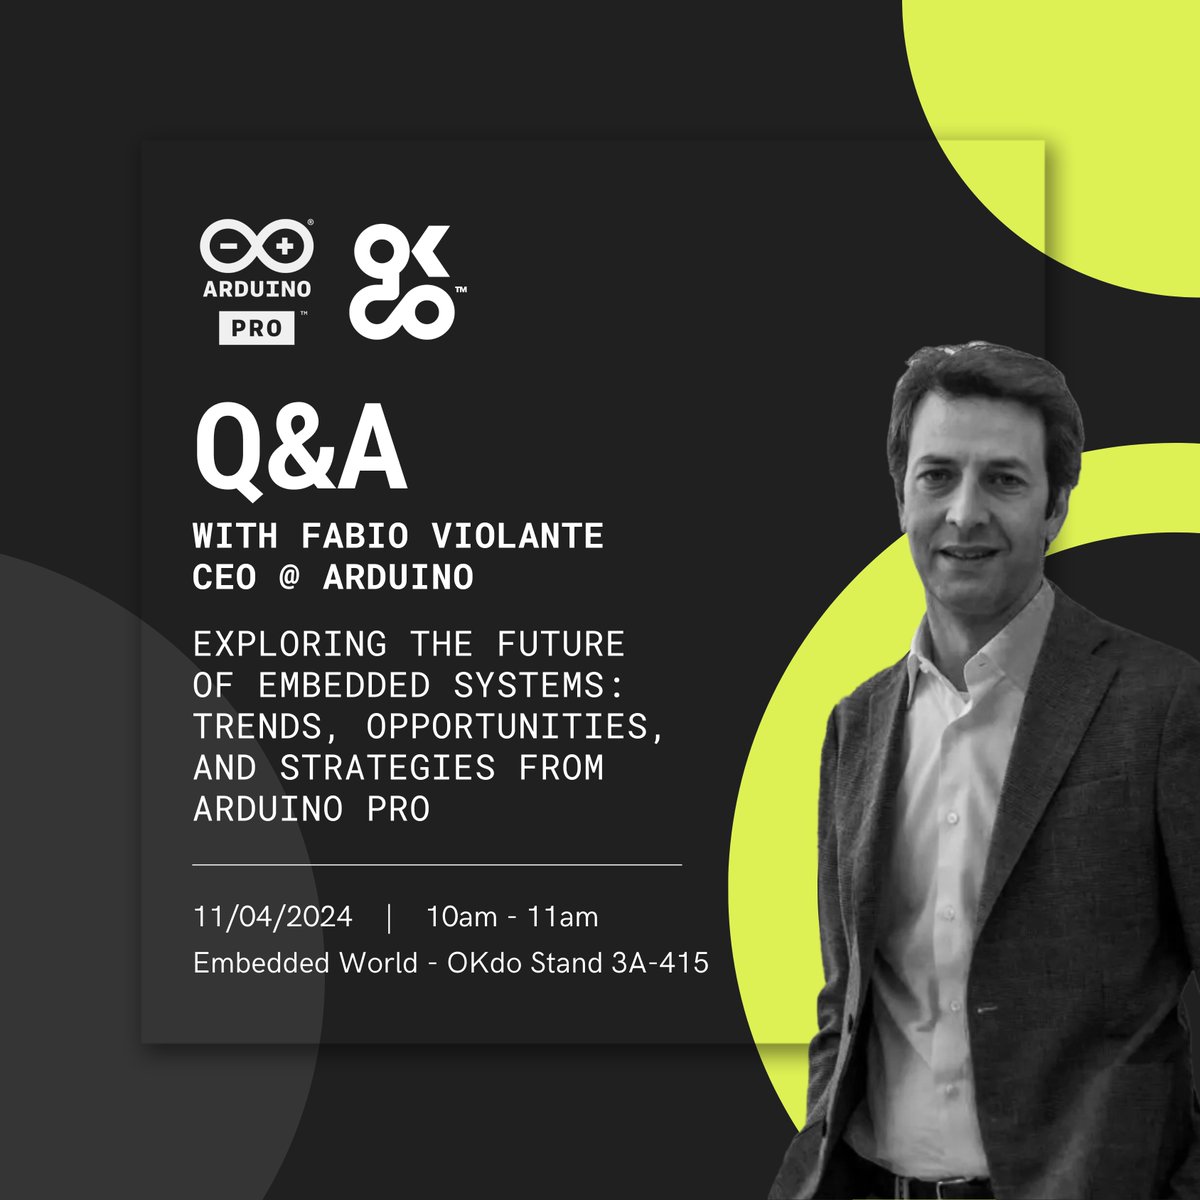 Join us tomorrow at #EW25 at stand 3A-415 for a special Q&A session with Fabio Violante, CEO of @Arduino . Get insights into the future of embedded systems and #ArduinoPro strategies. Don't miss out! See you at 10AM! #LetsOKdo #Arduino #TechLeaders #Innovation